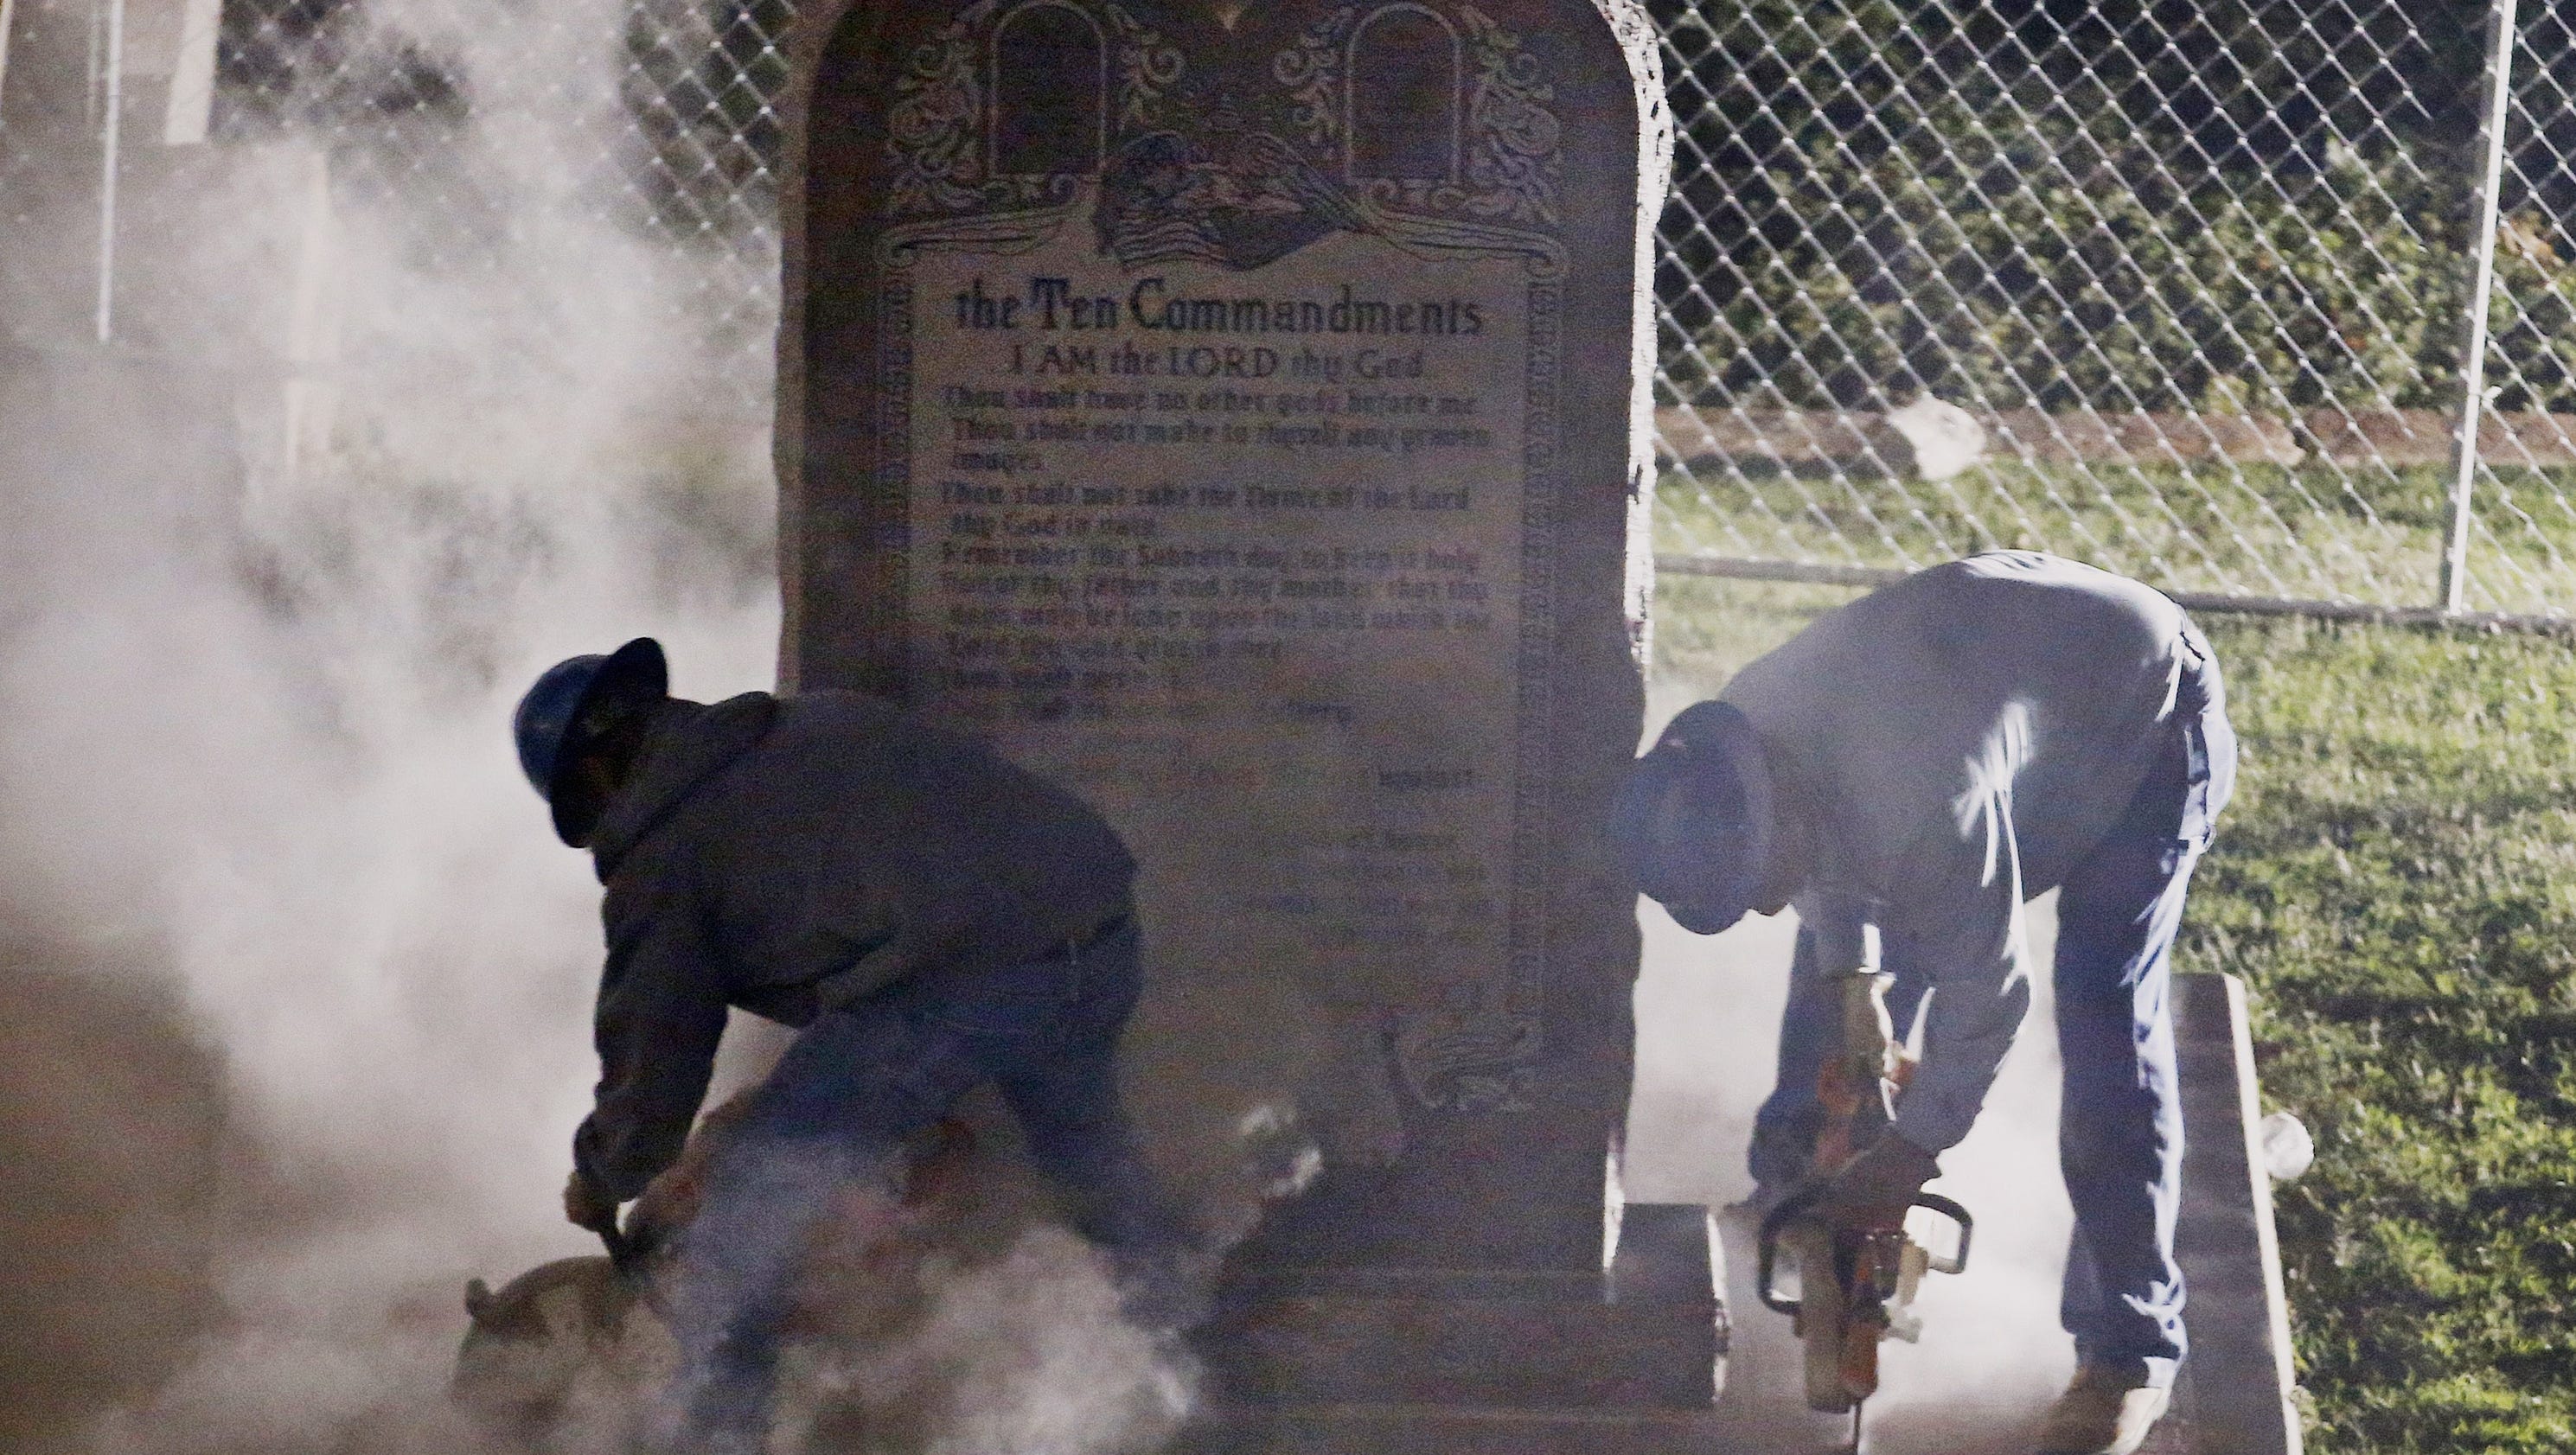 10 Commandments removed from Okla. Capitol3200 x 1680